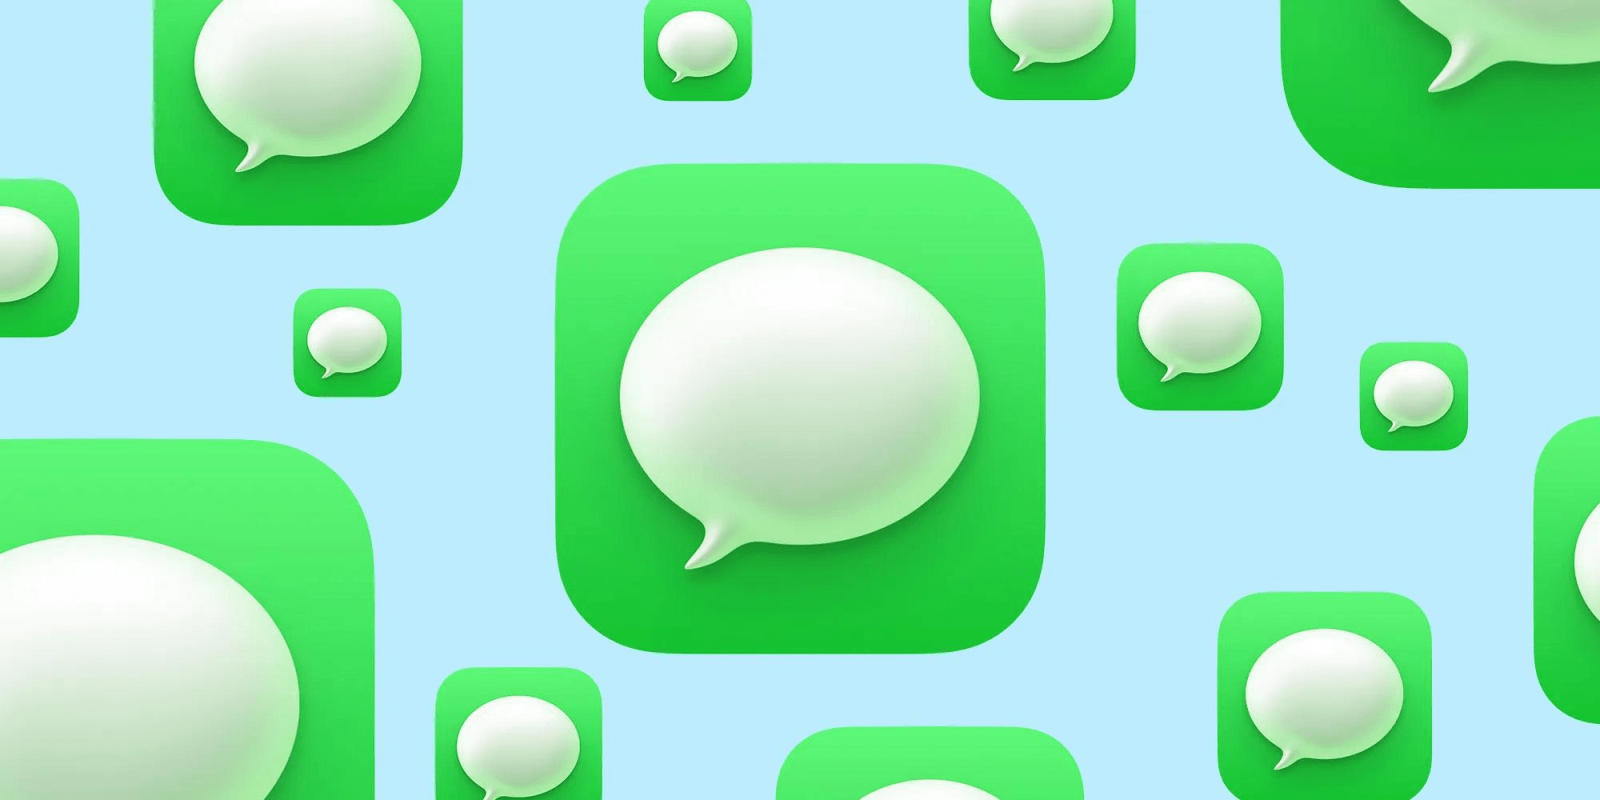 Report: Apple claims iMessage not big enough to fall under purview of EU ‘gatekeeper’ competition law